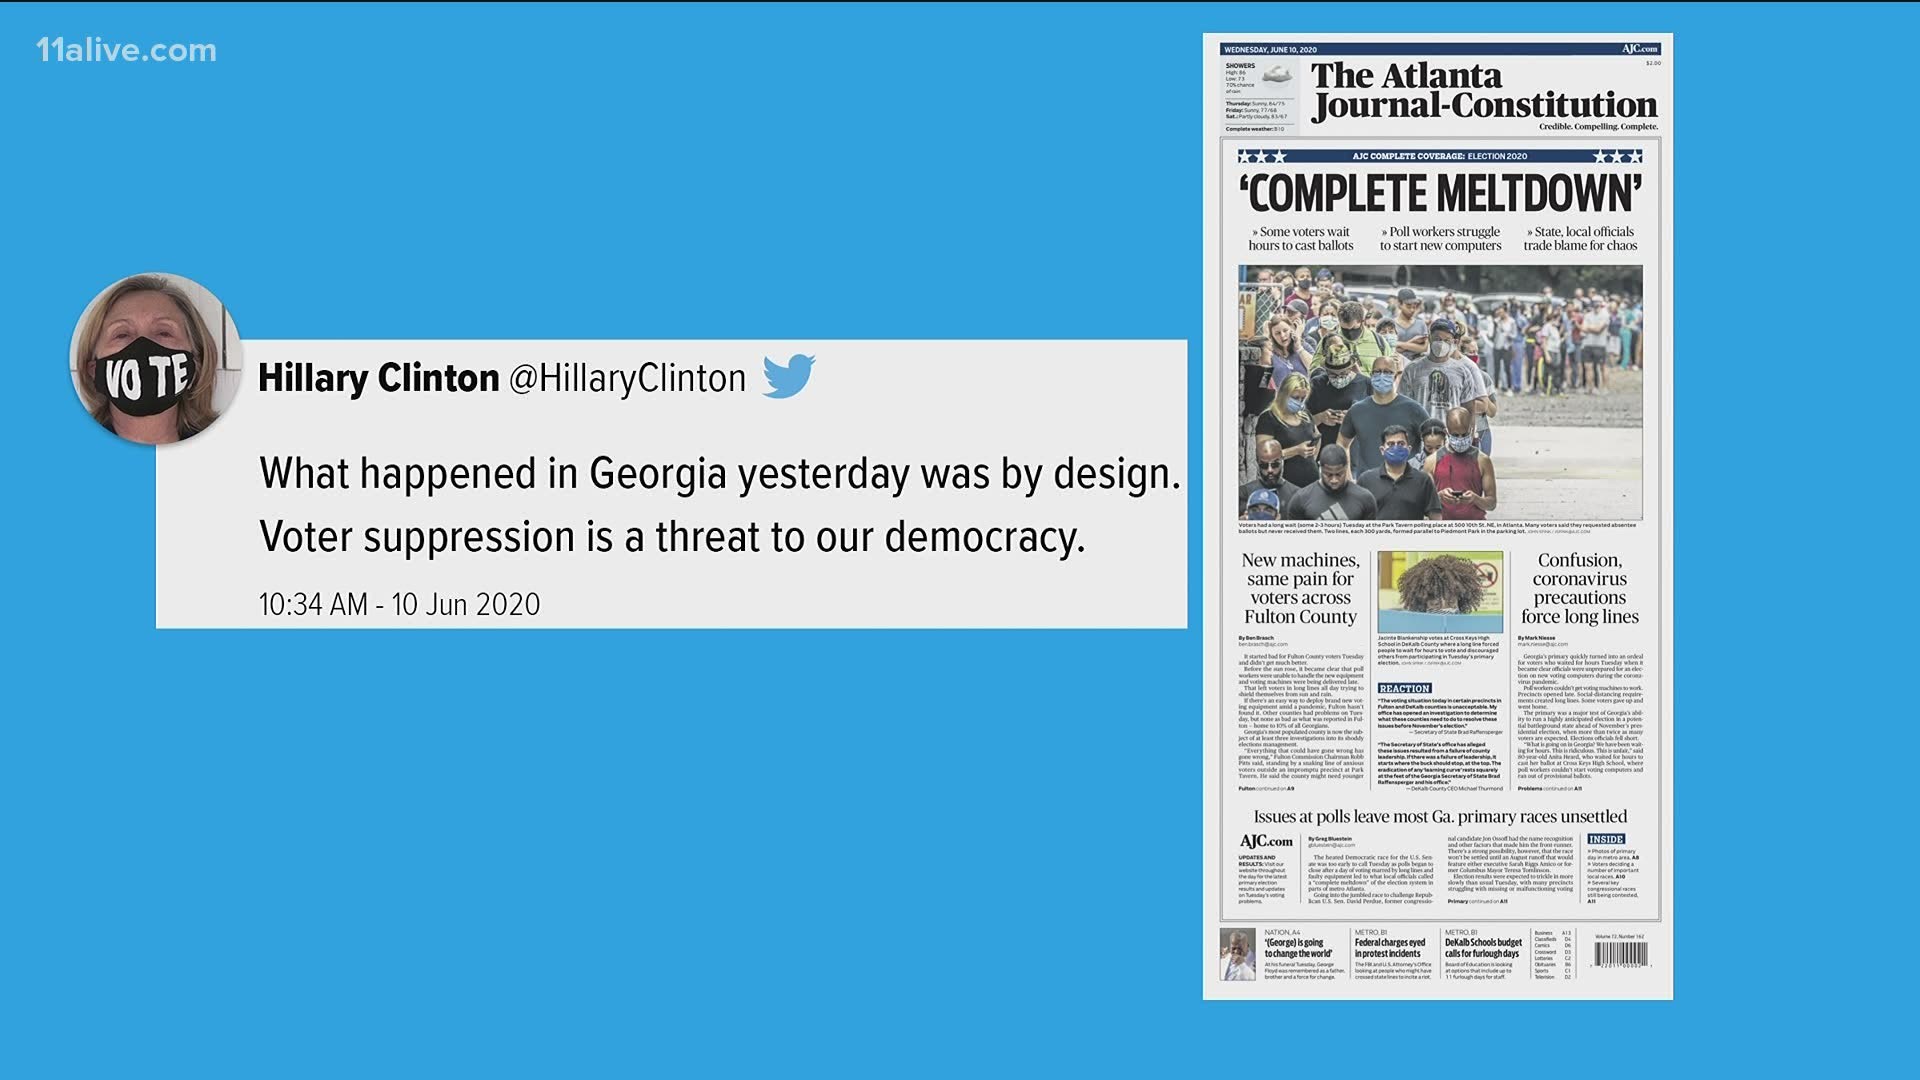 Clinton tweeted about the issues.